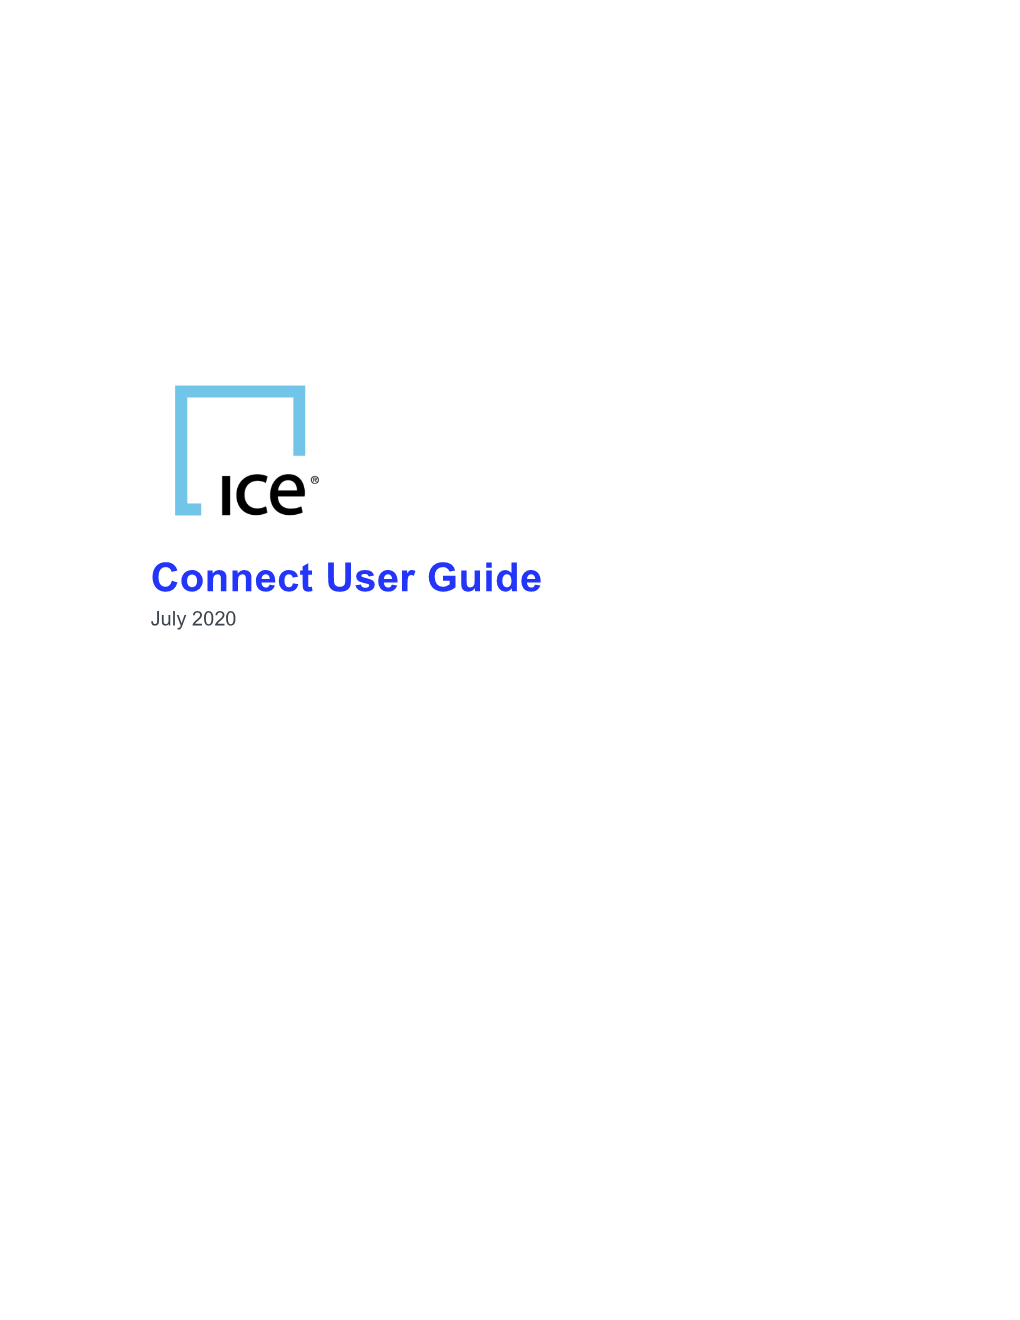 View User Guide